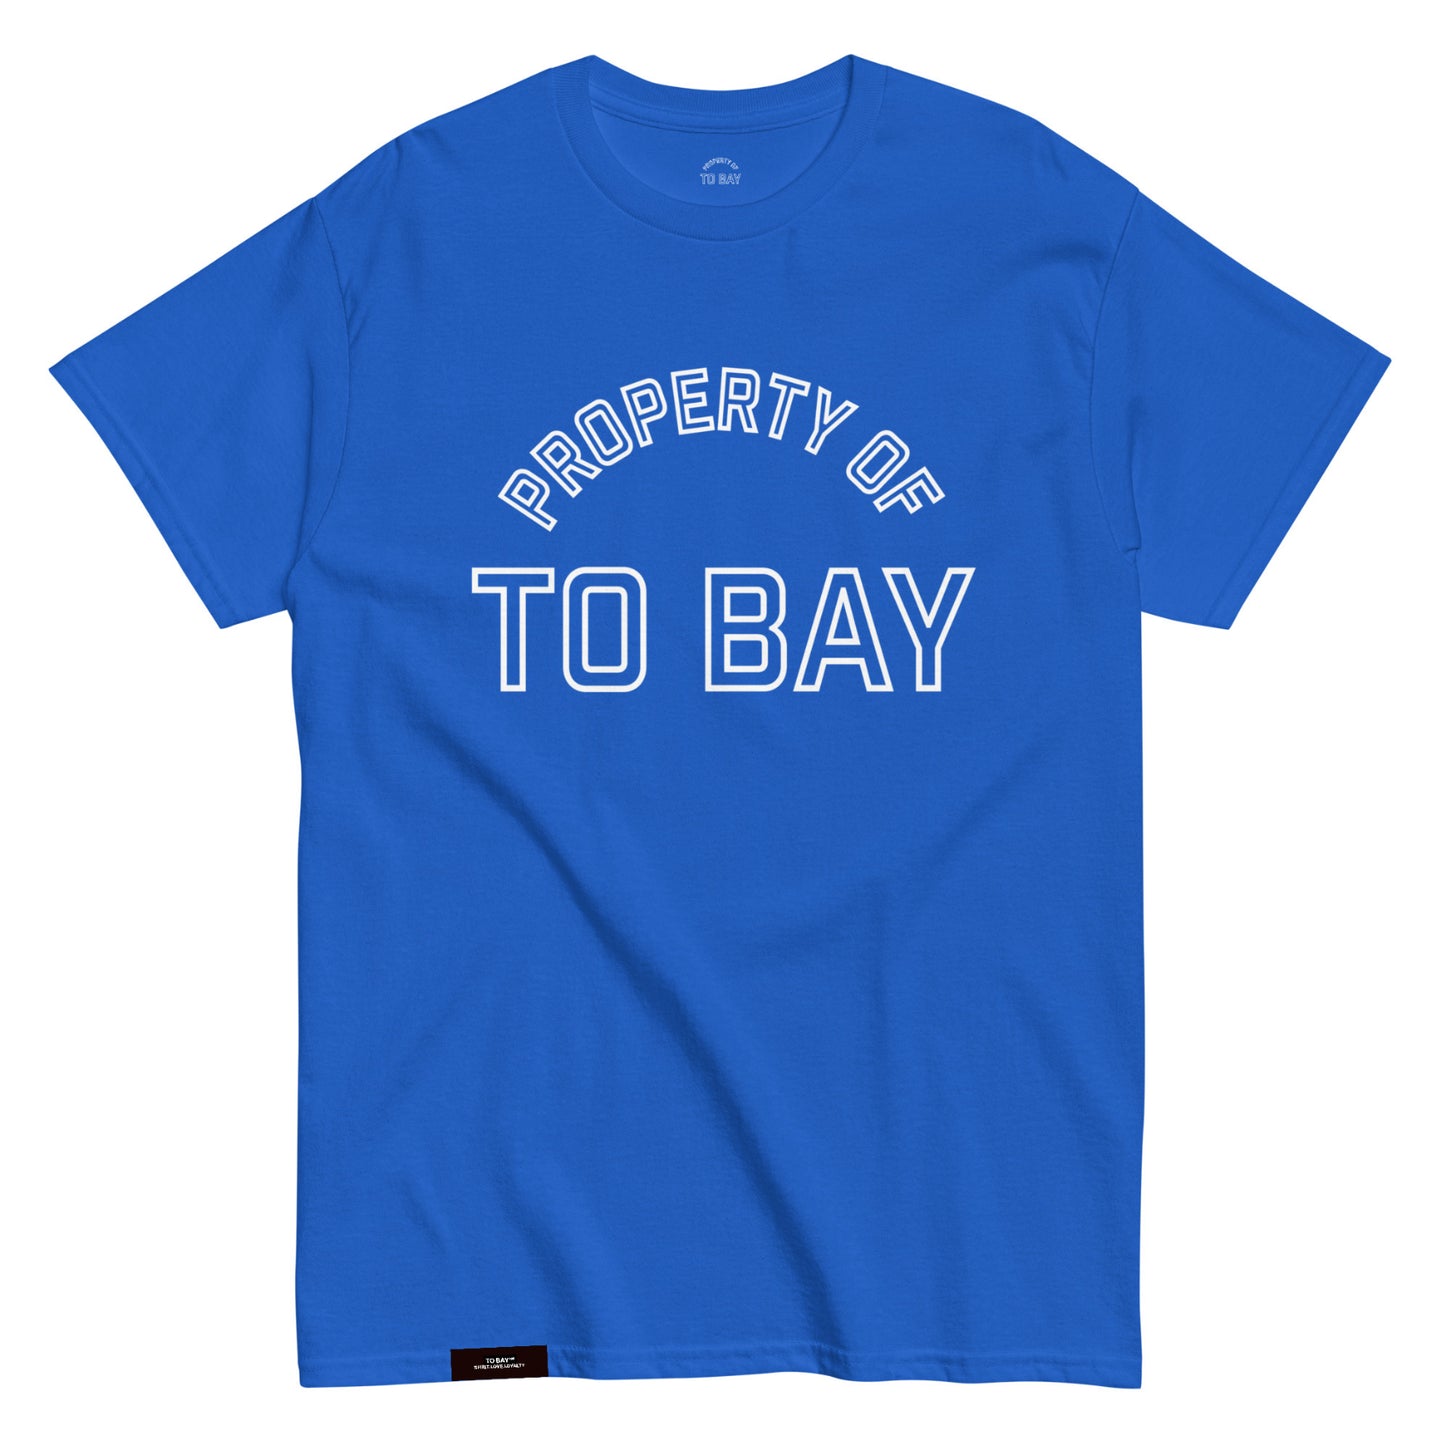 Property of TO BAY tee